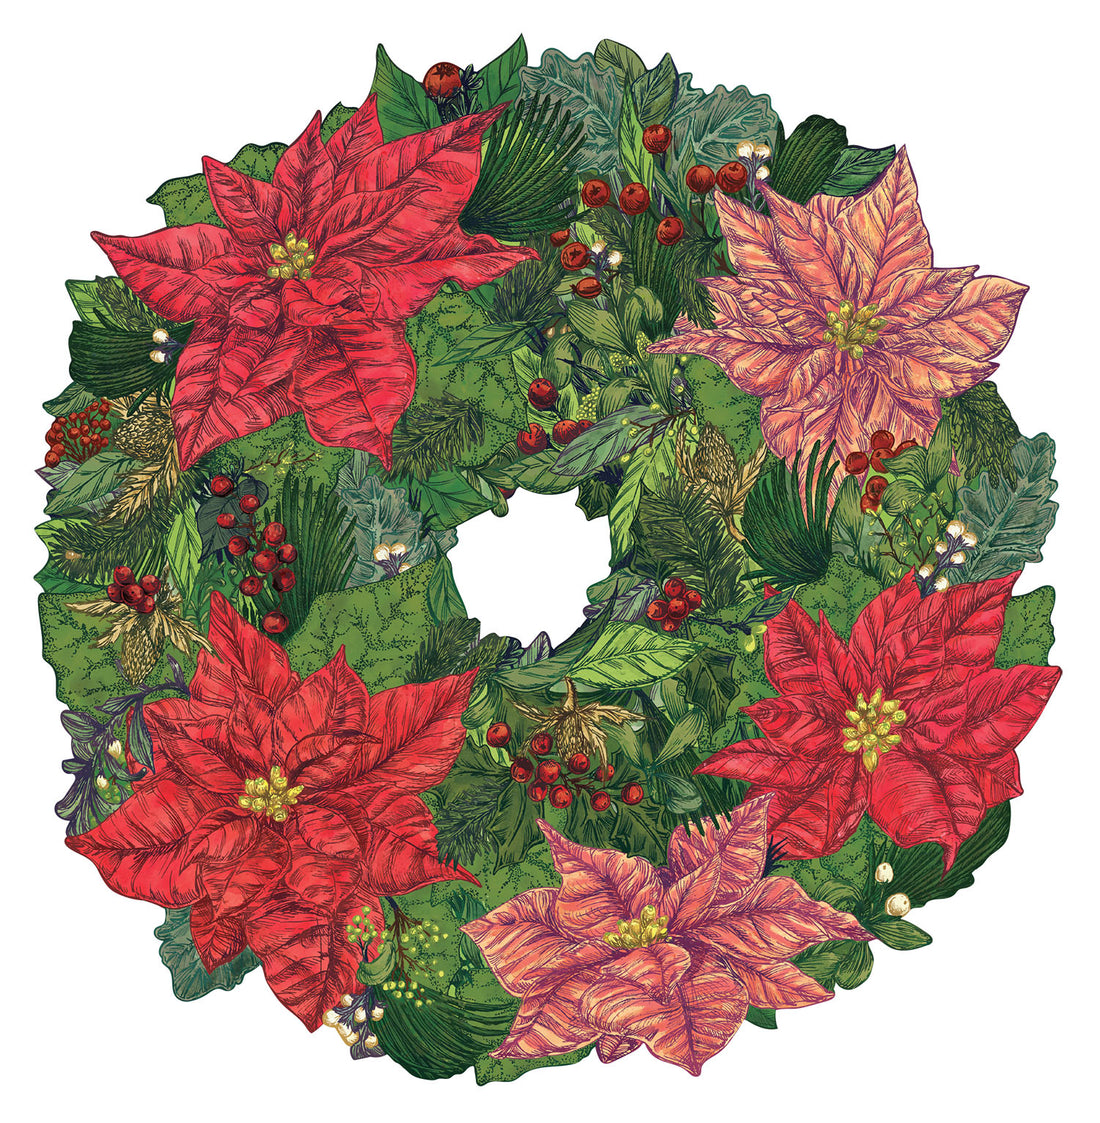 A die-cut illustrated wreath of red and pink poinsettia blooms among densely-packed green winter foliage with red berries, with an open white center.